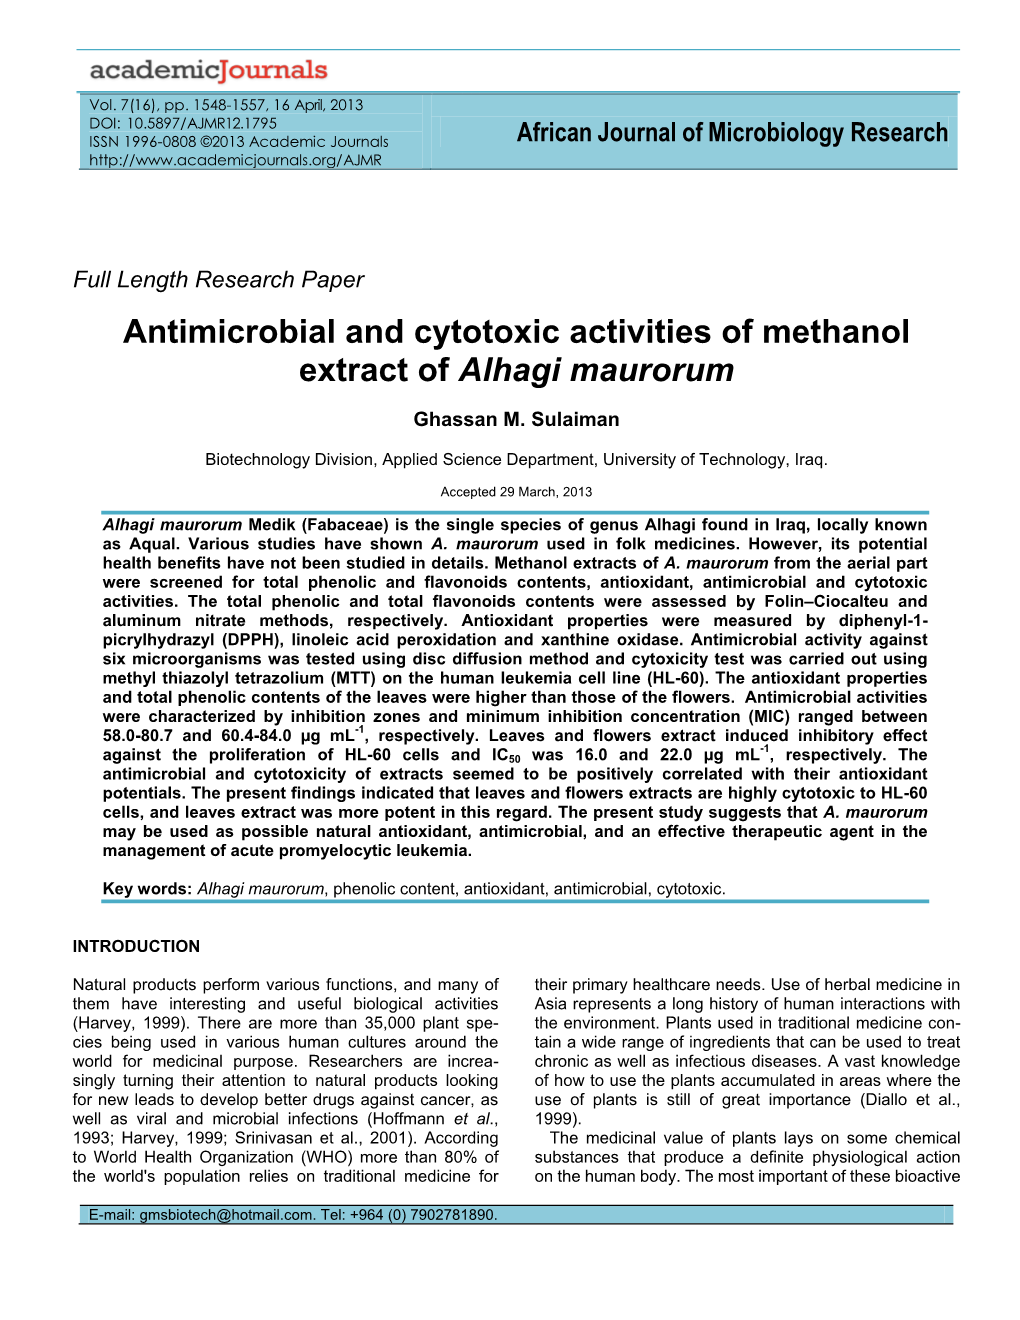 Antimicrobial and Cytotoxic Activities of Methanol Extract of Alhagi Maurorum